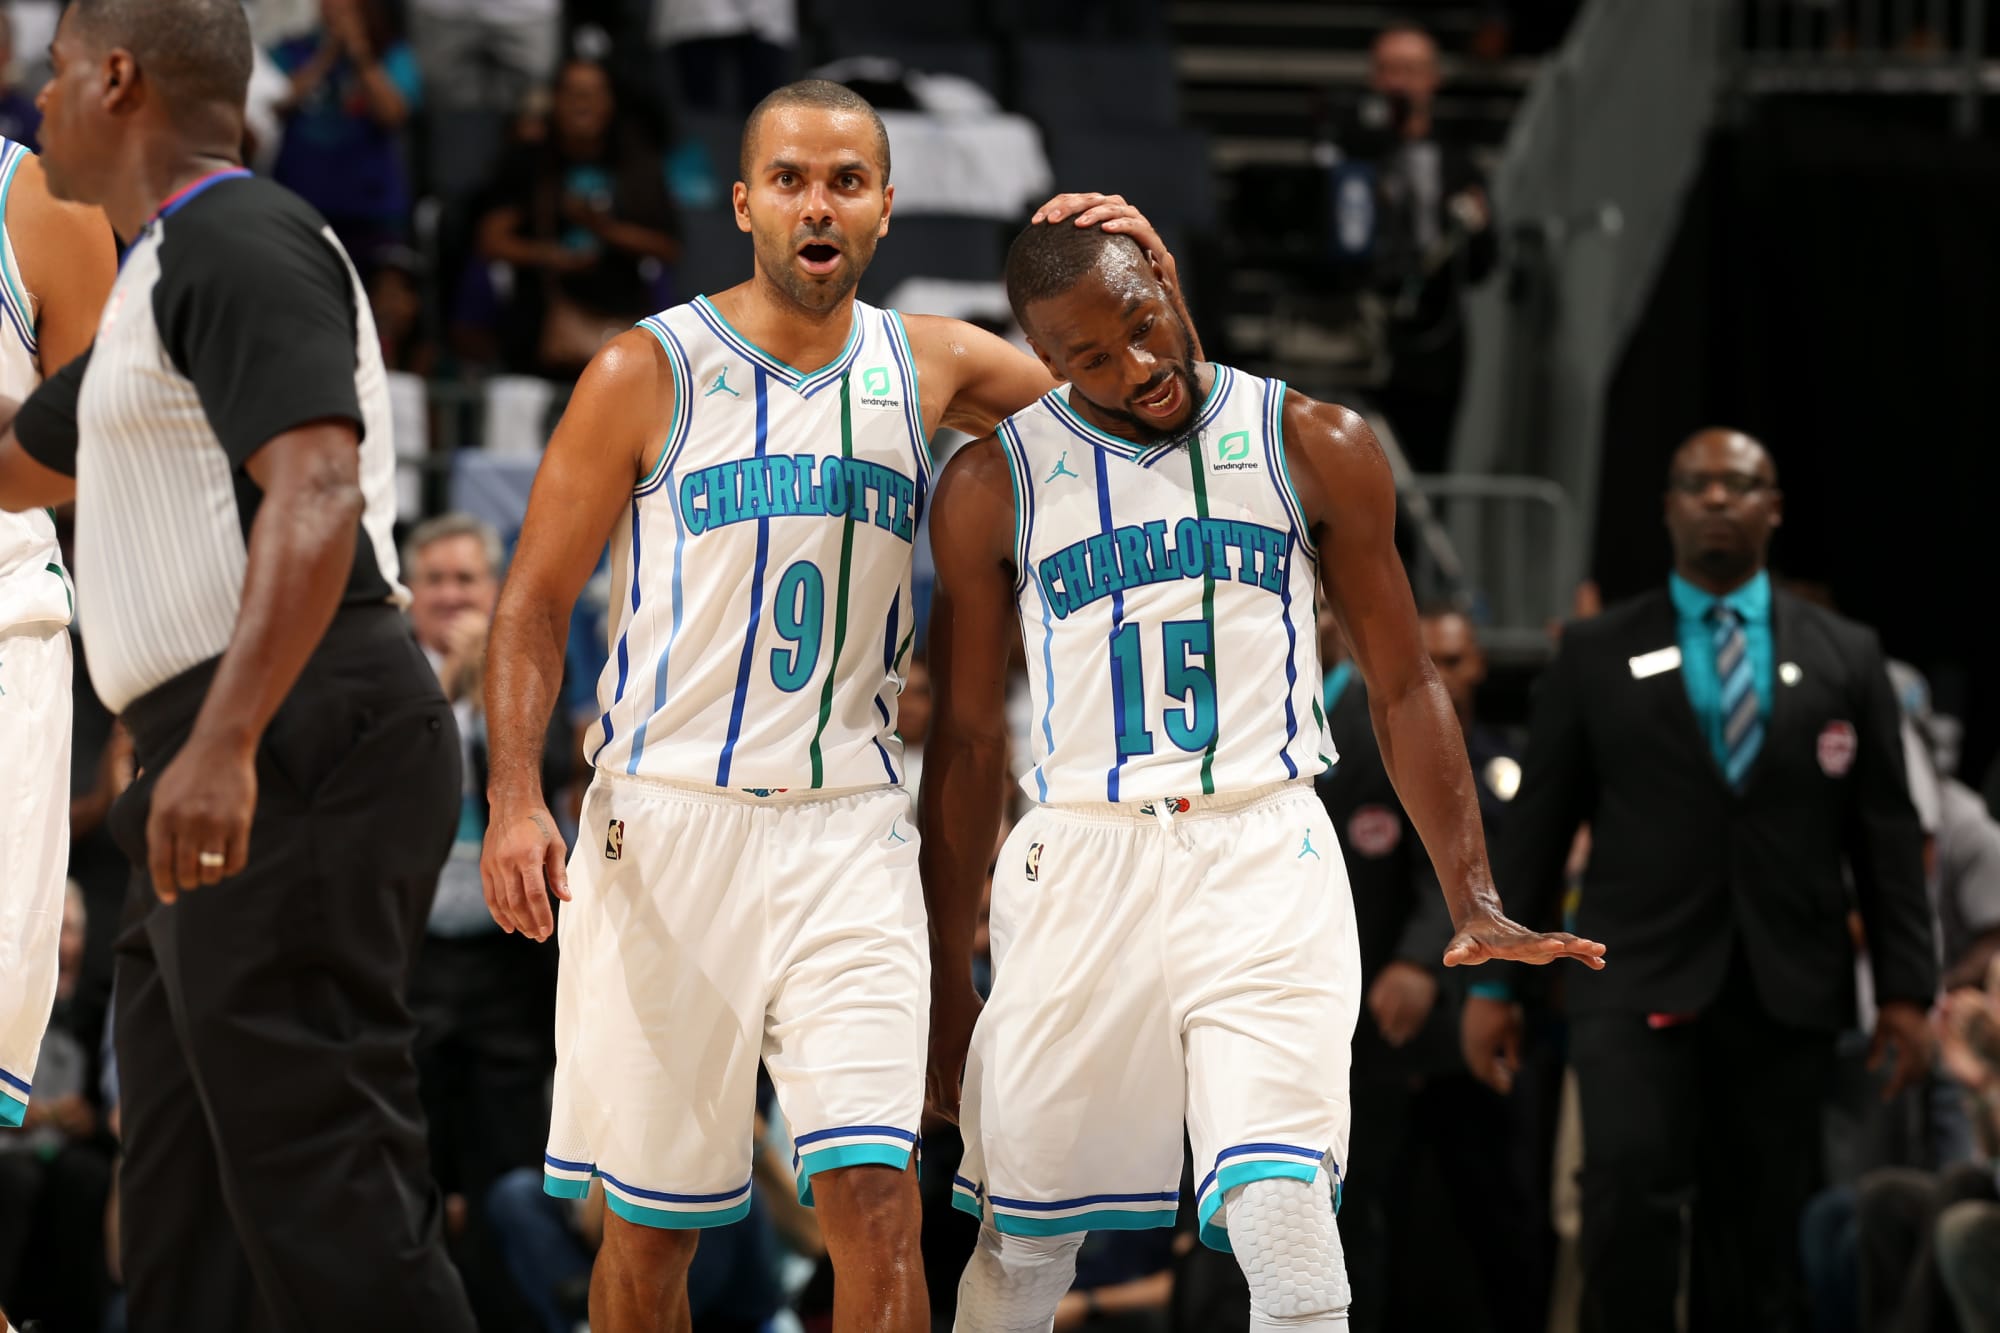 Charlotte Hornets City Edition Uniform: fanbase mad about basketball